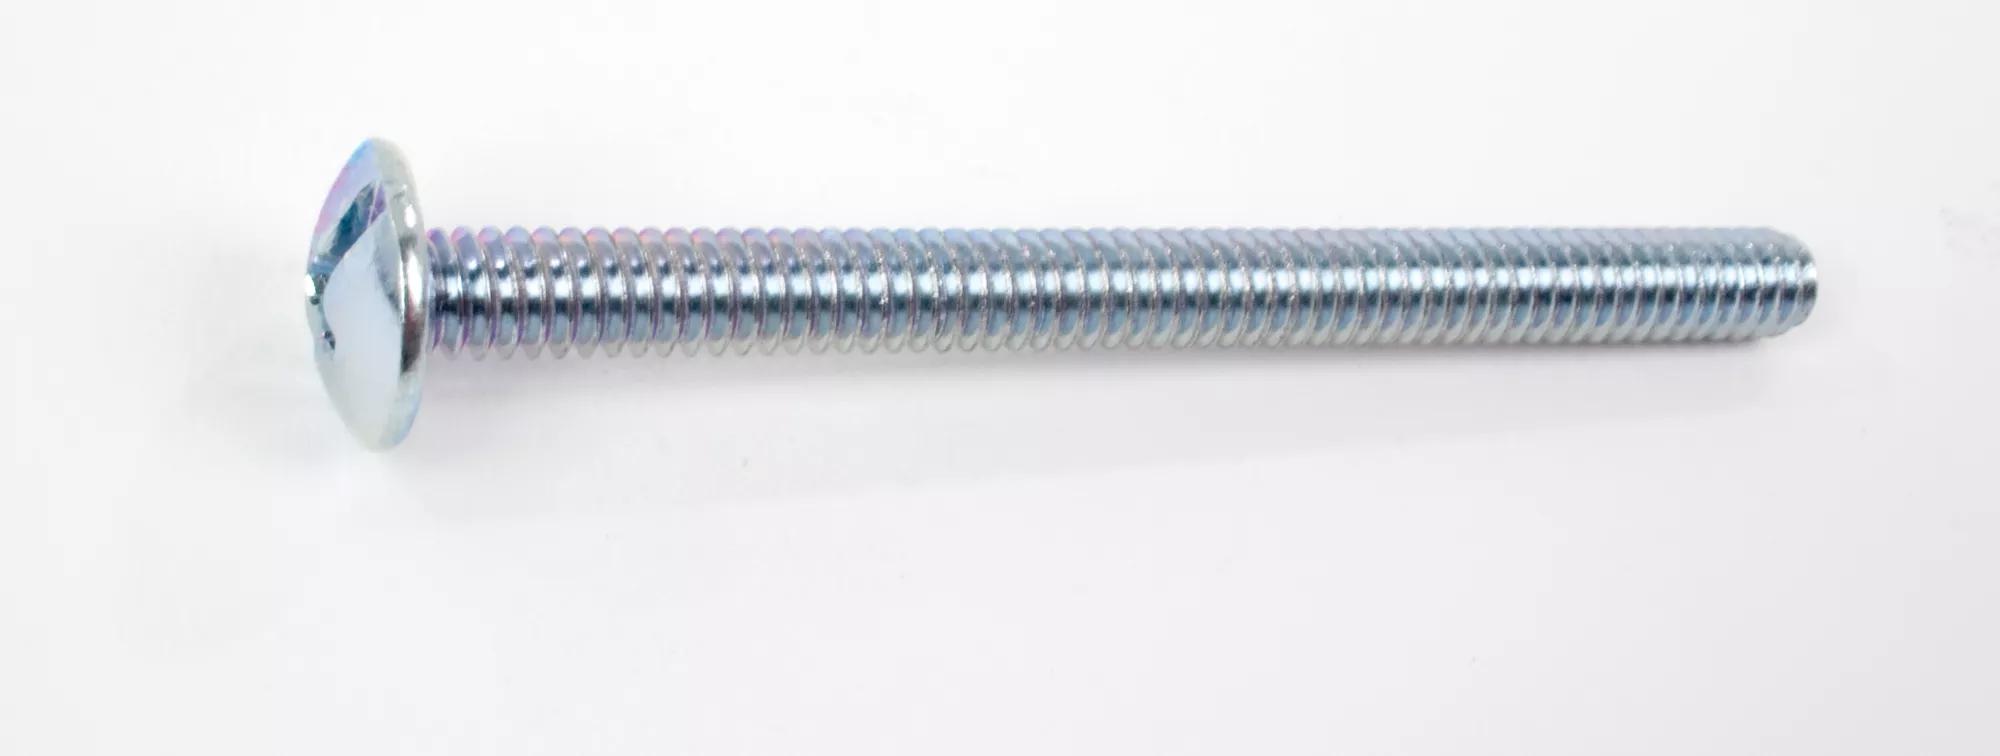 1/8" x 2" Wing Type Toggle Bolt Assembly